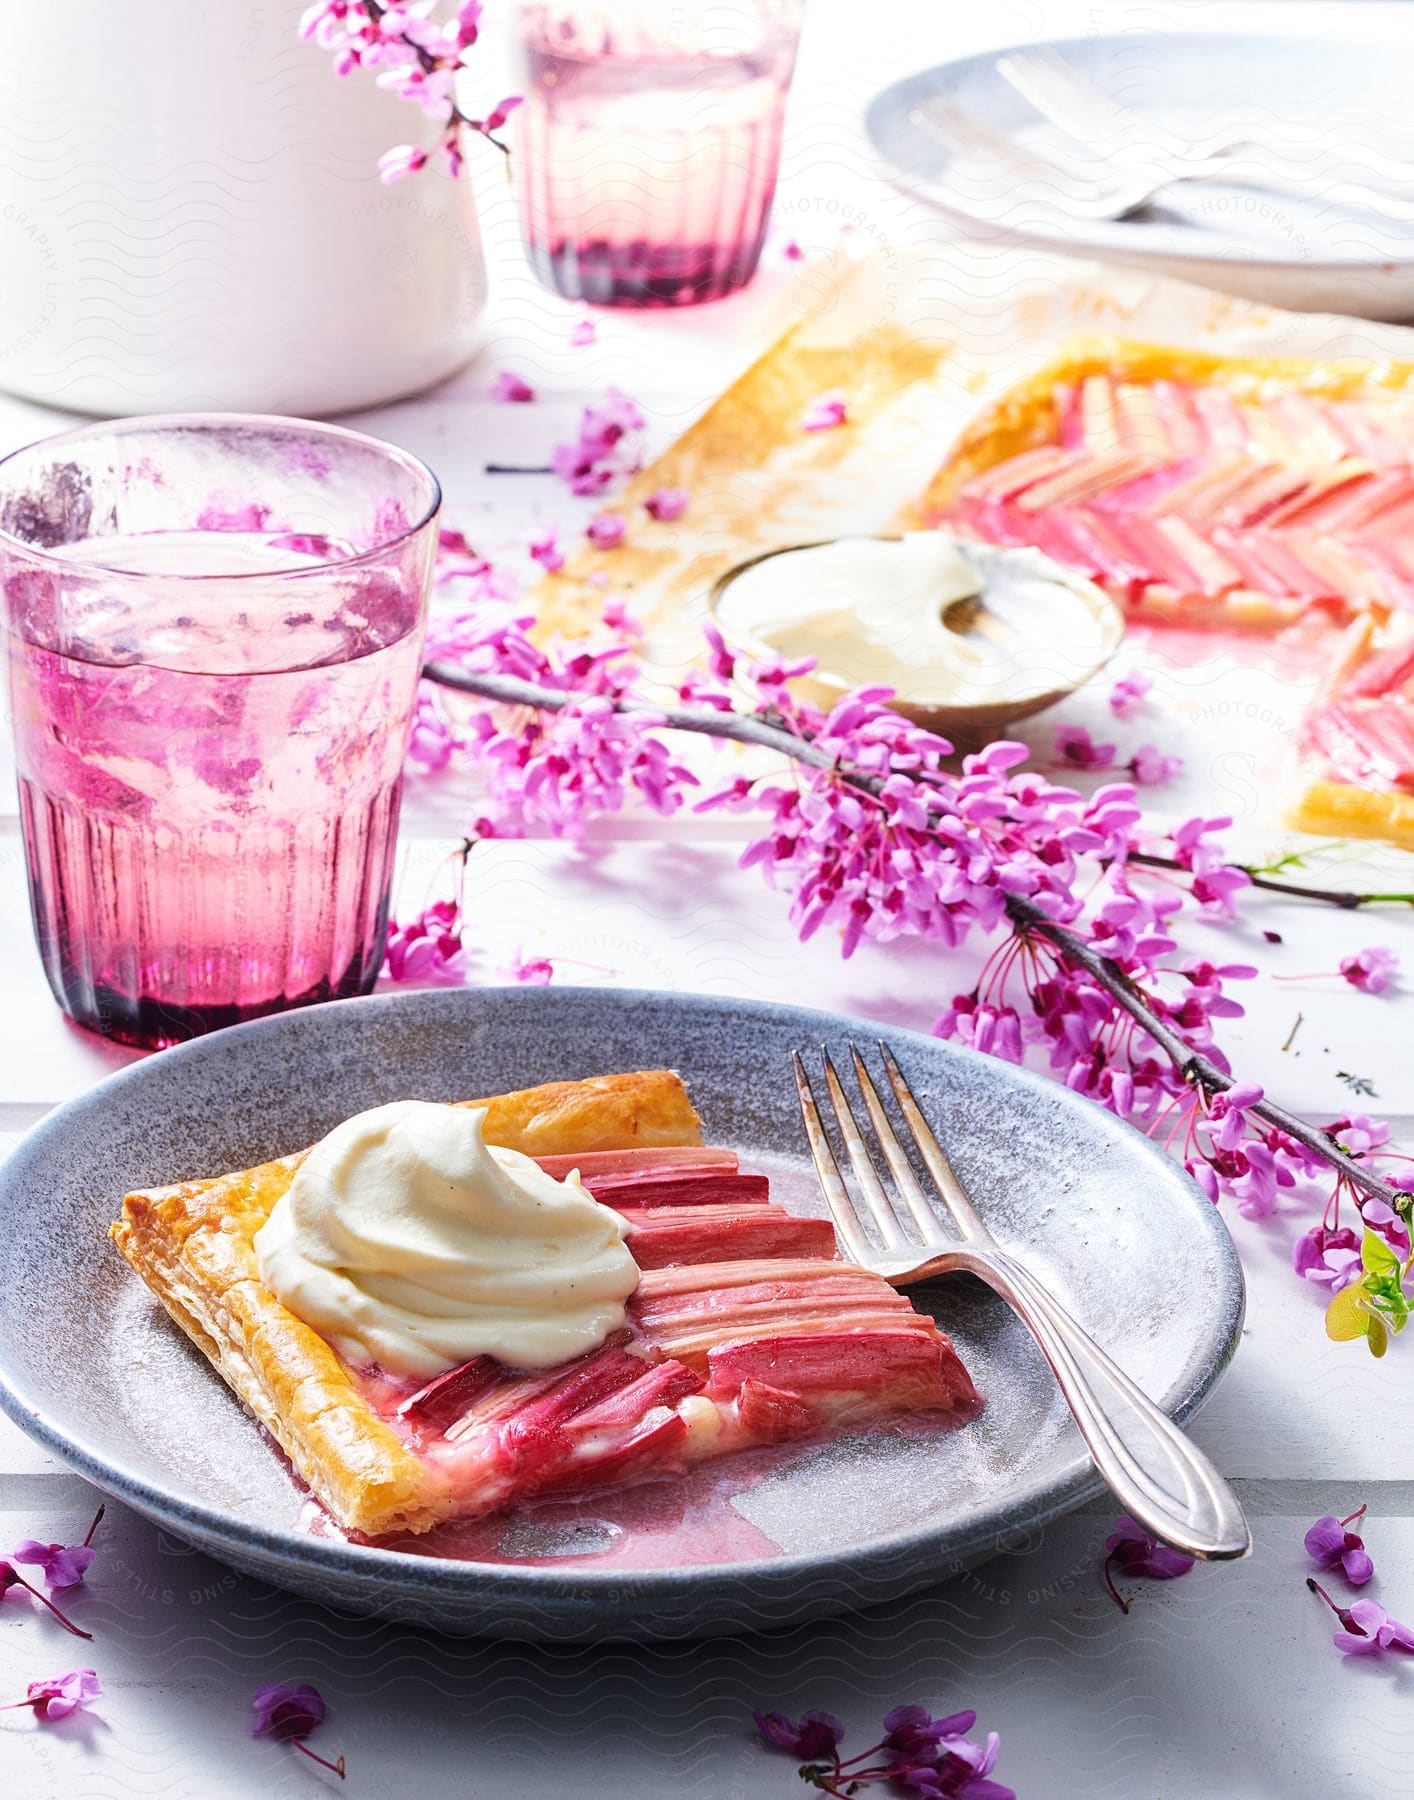 A slice of pie with cream water and purple flowers on a table